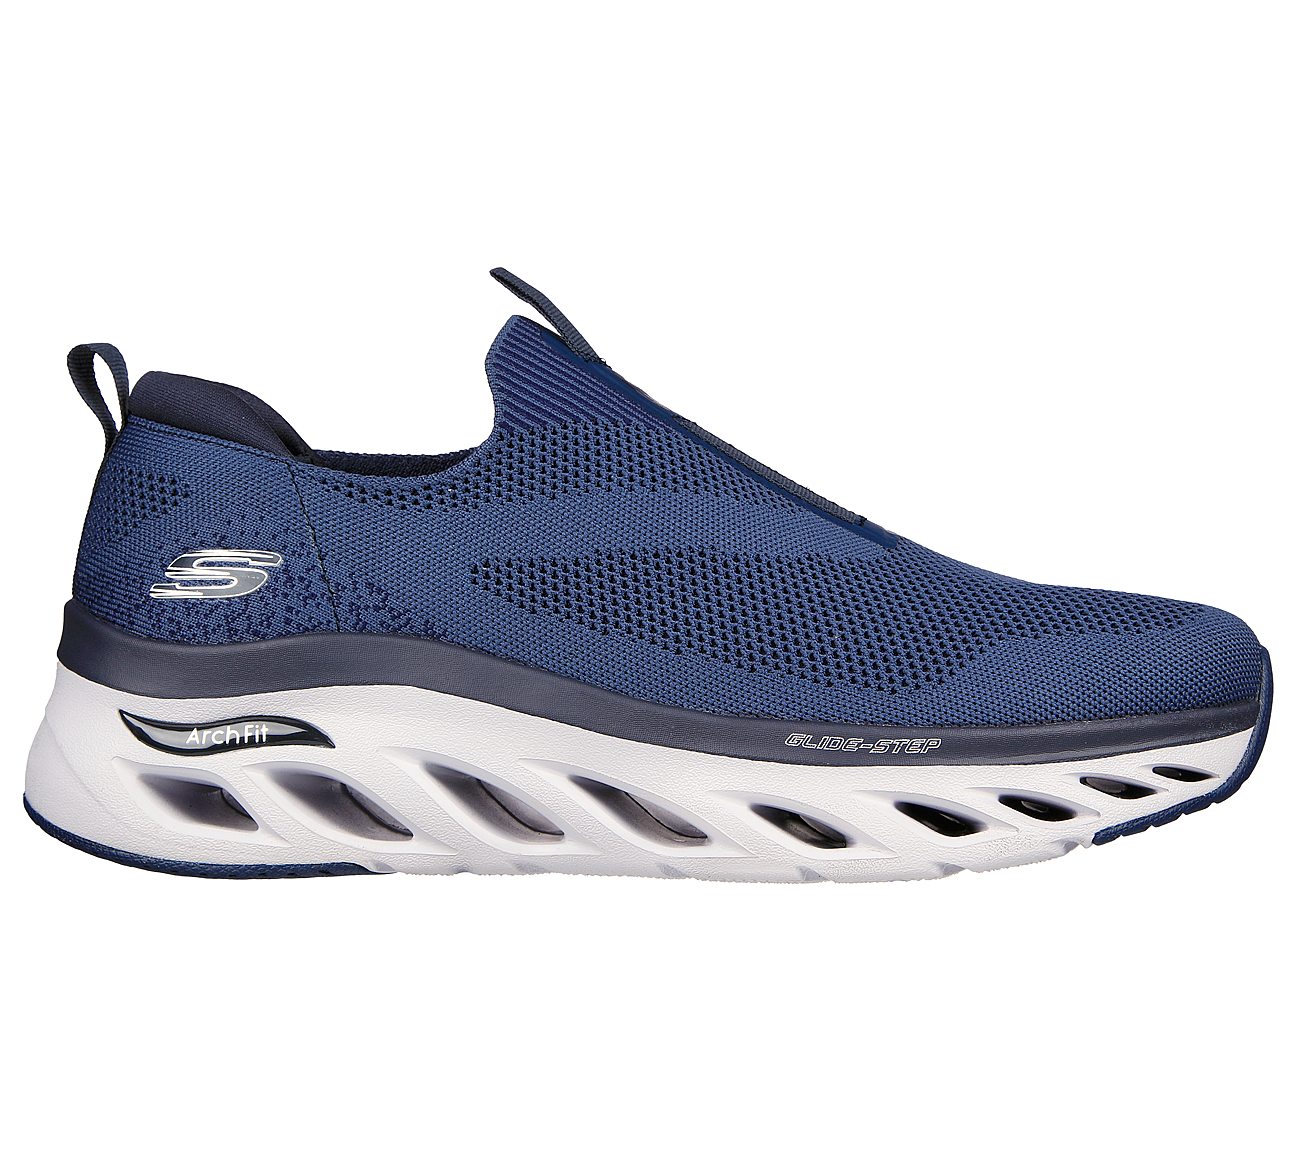 ARCH FIT GLIDE-STEP - NODE, NNNAVY Footwear Lateral View